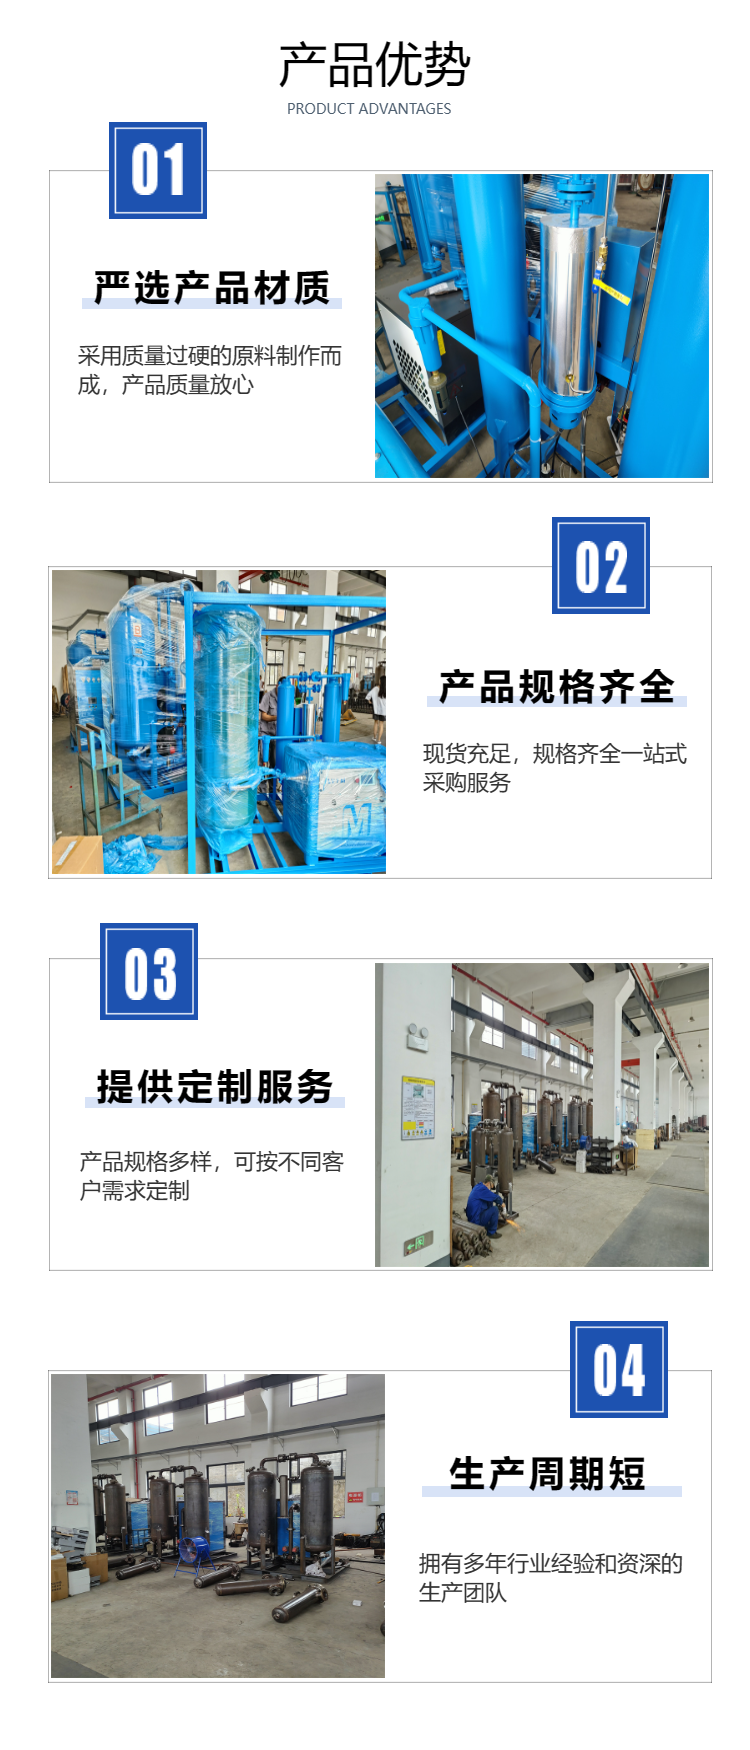 Air compressor, gas Dehumidifier, compressed air dryer, energy-saving water cooling, air blowing, micro heat adsorption dehydrator